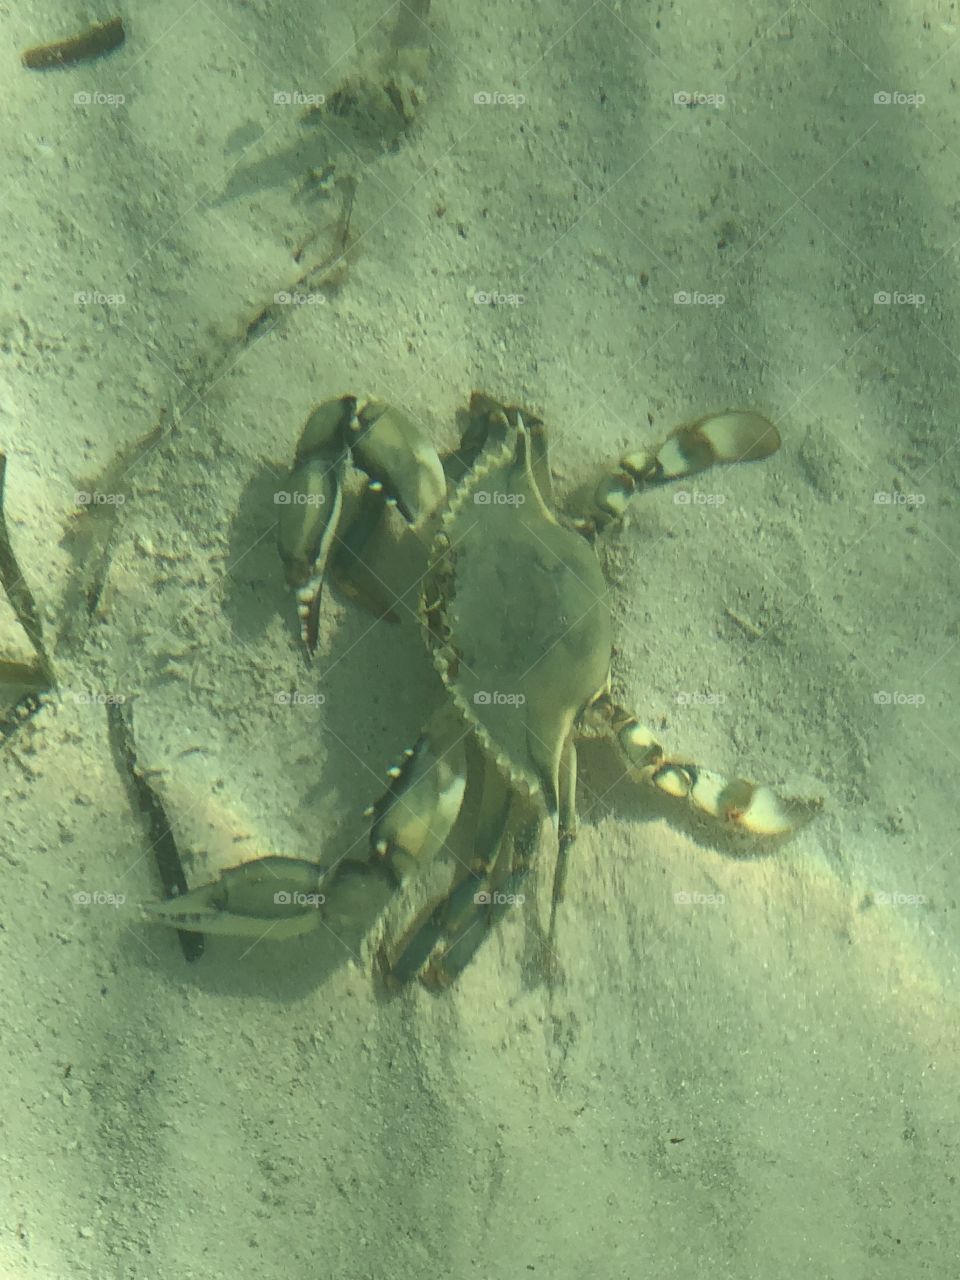 Blue Crab in the Florida Keys 